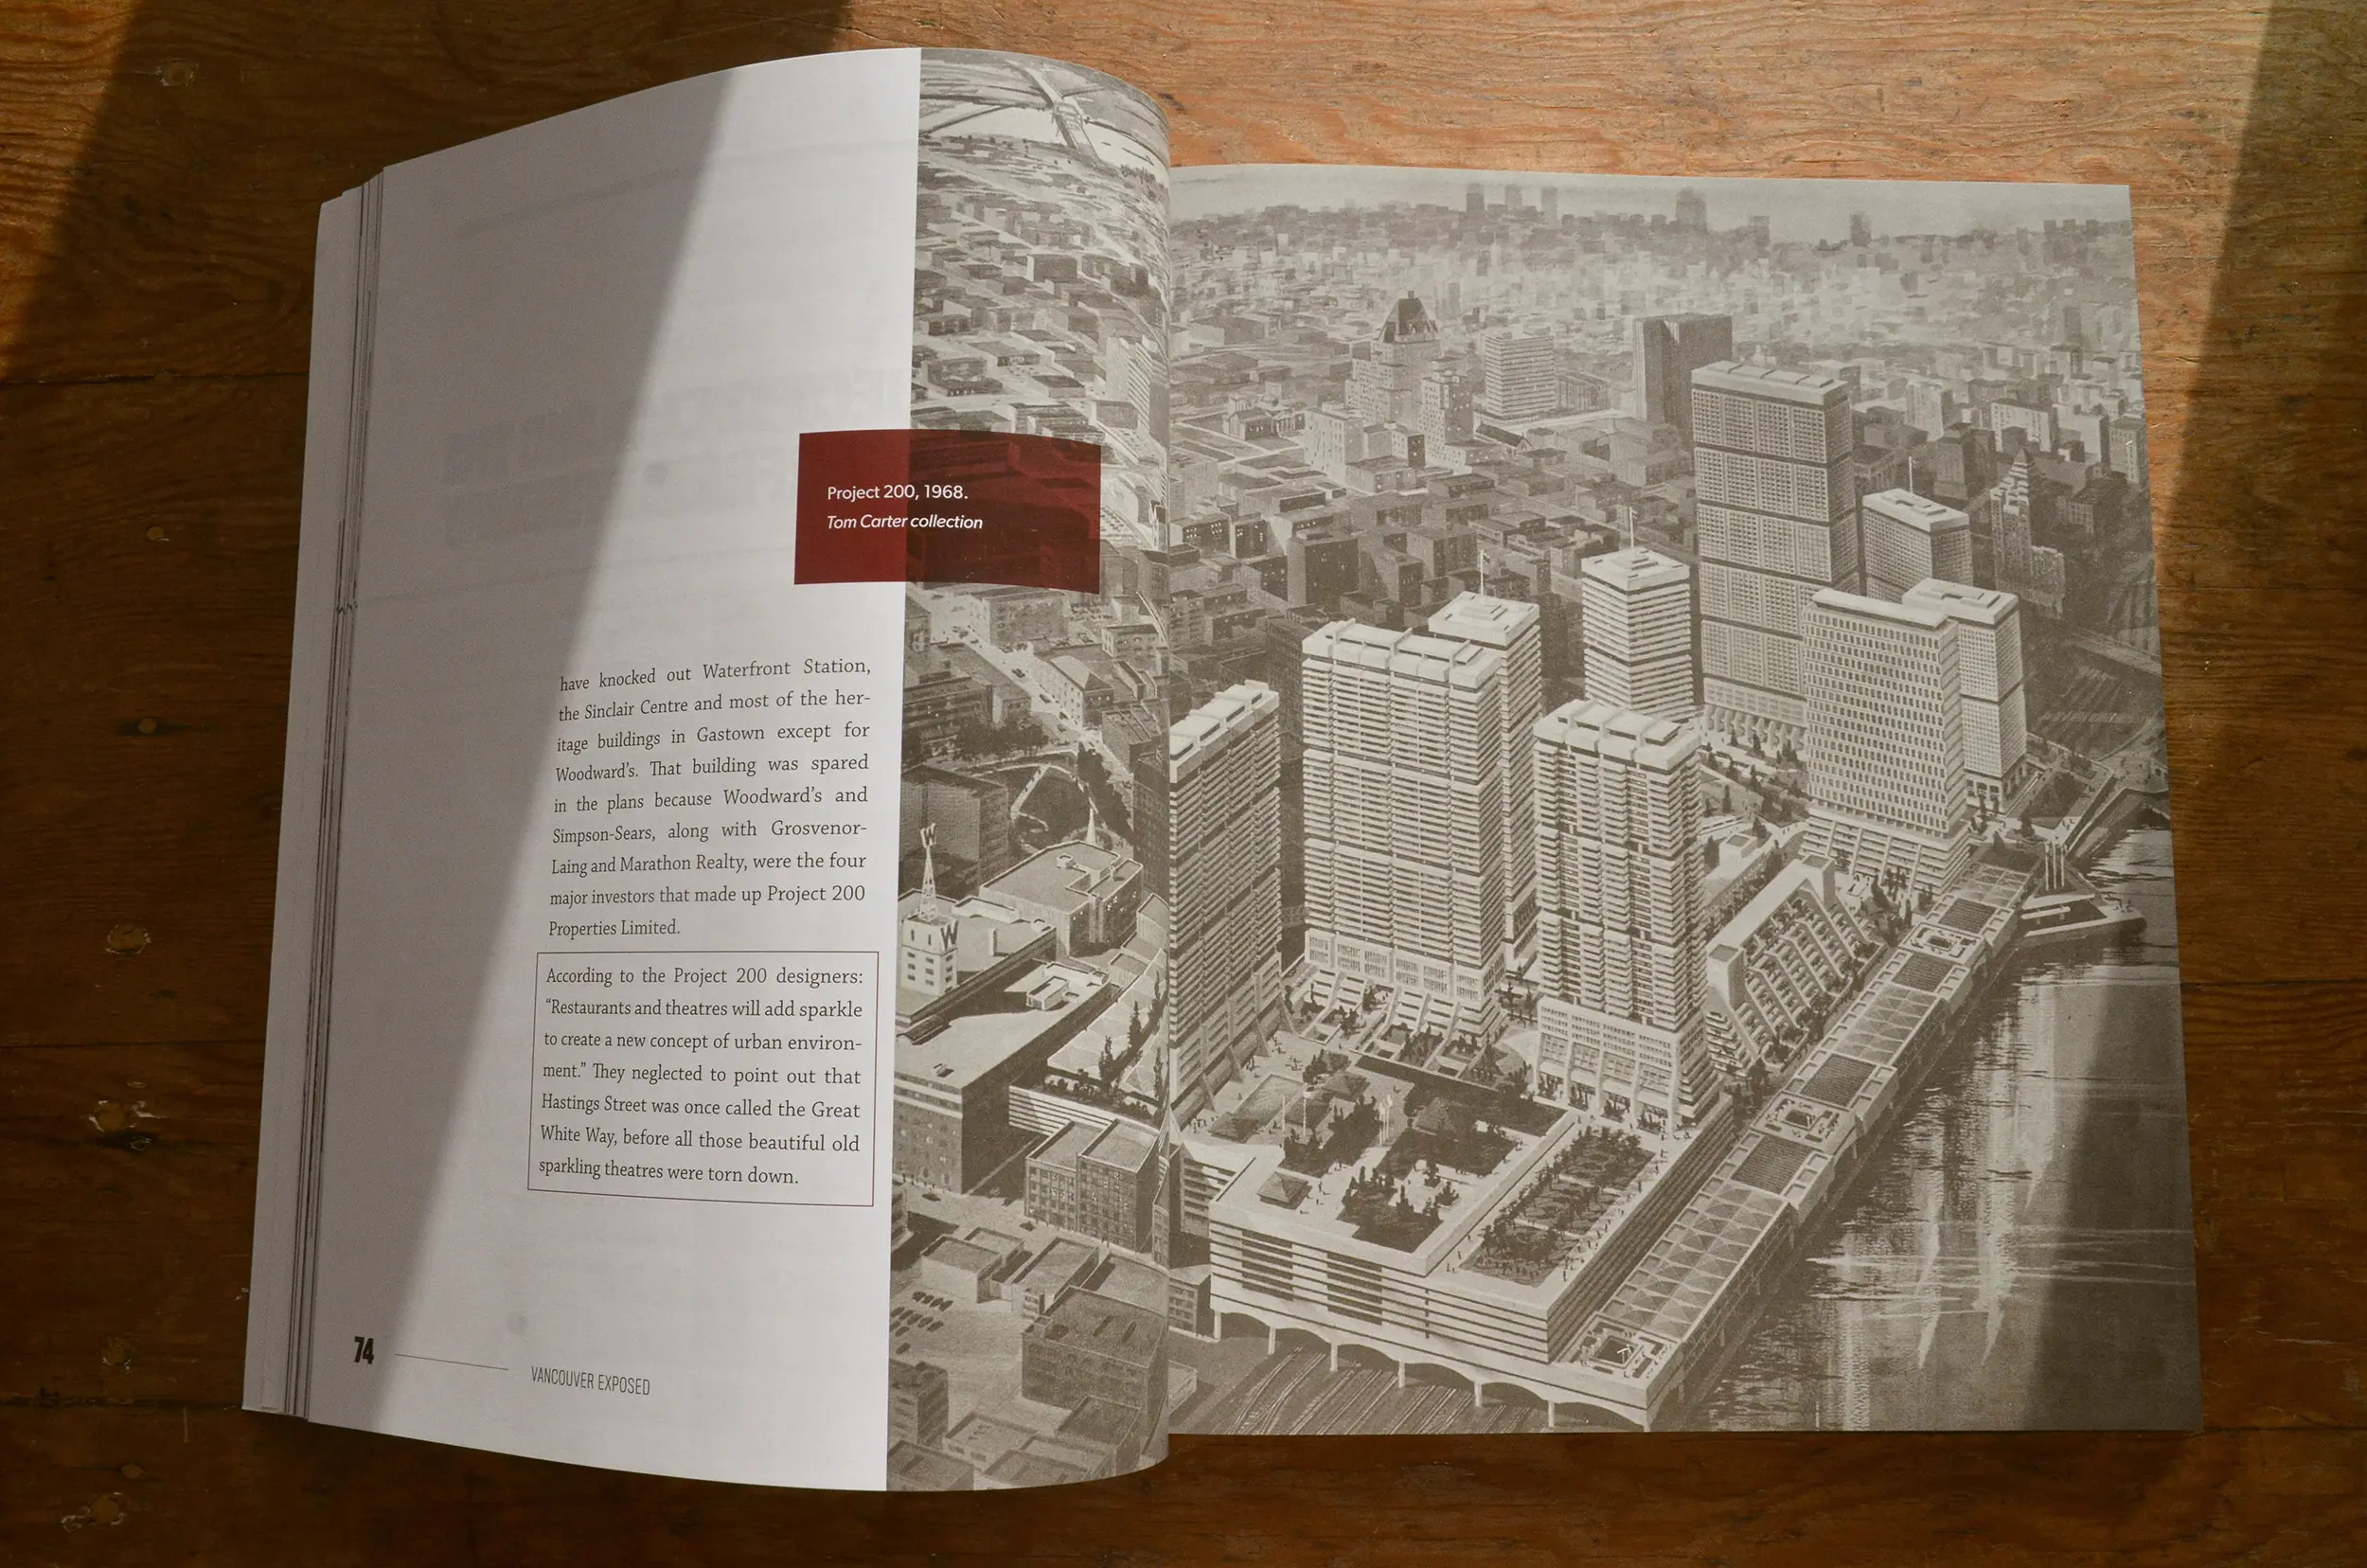 An example of our work, featuring the interior layout of a visual heavy history book, Vancouver Exposed.